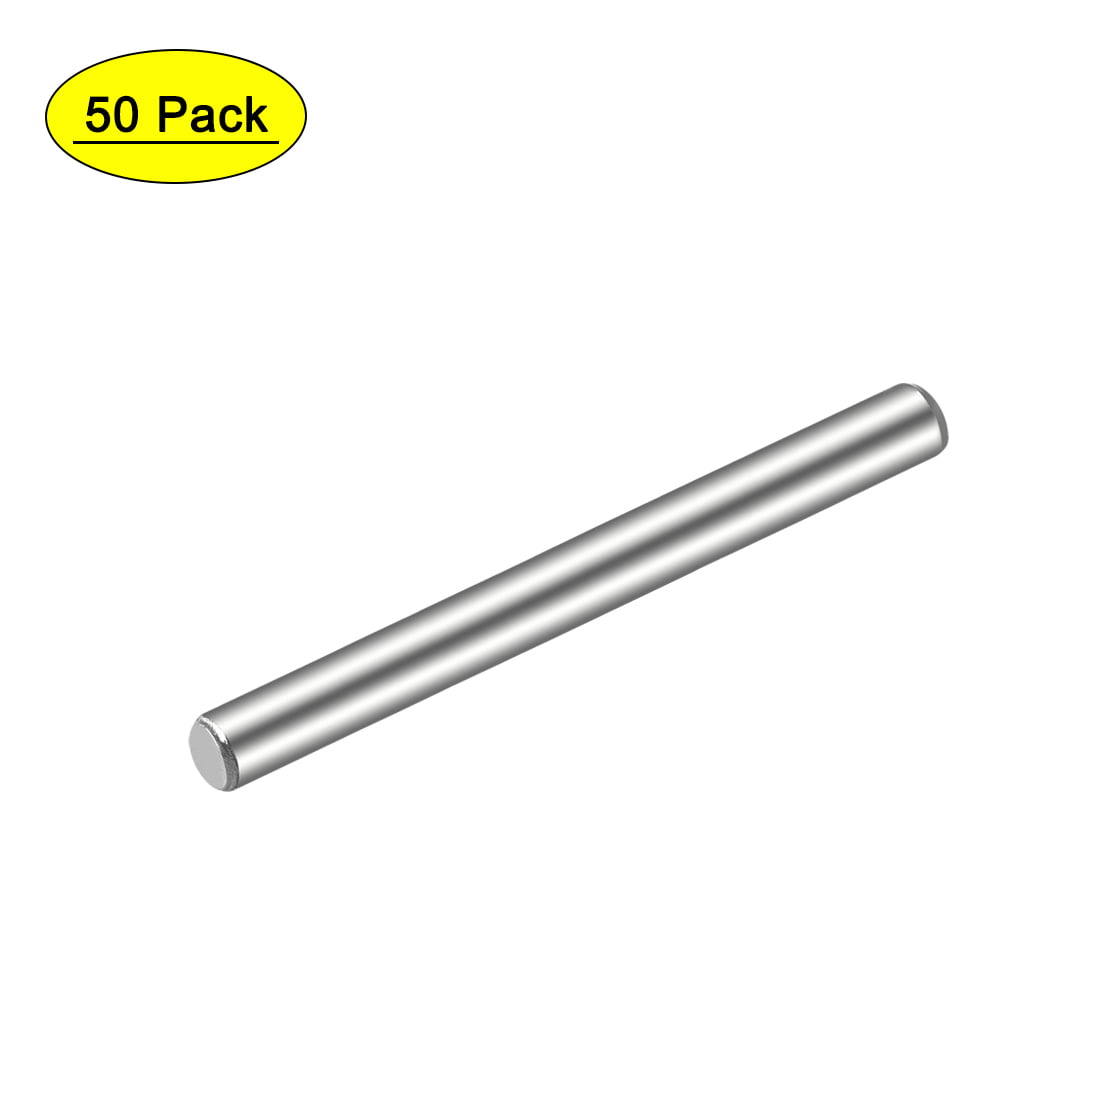 18-8 Stainless Steel Dowel Pins 5/32" Dia x 1 1/8" Length 10 Pieces 